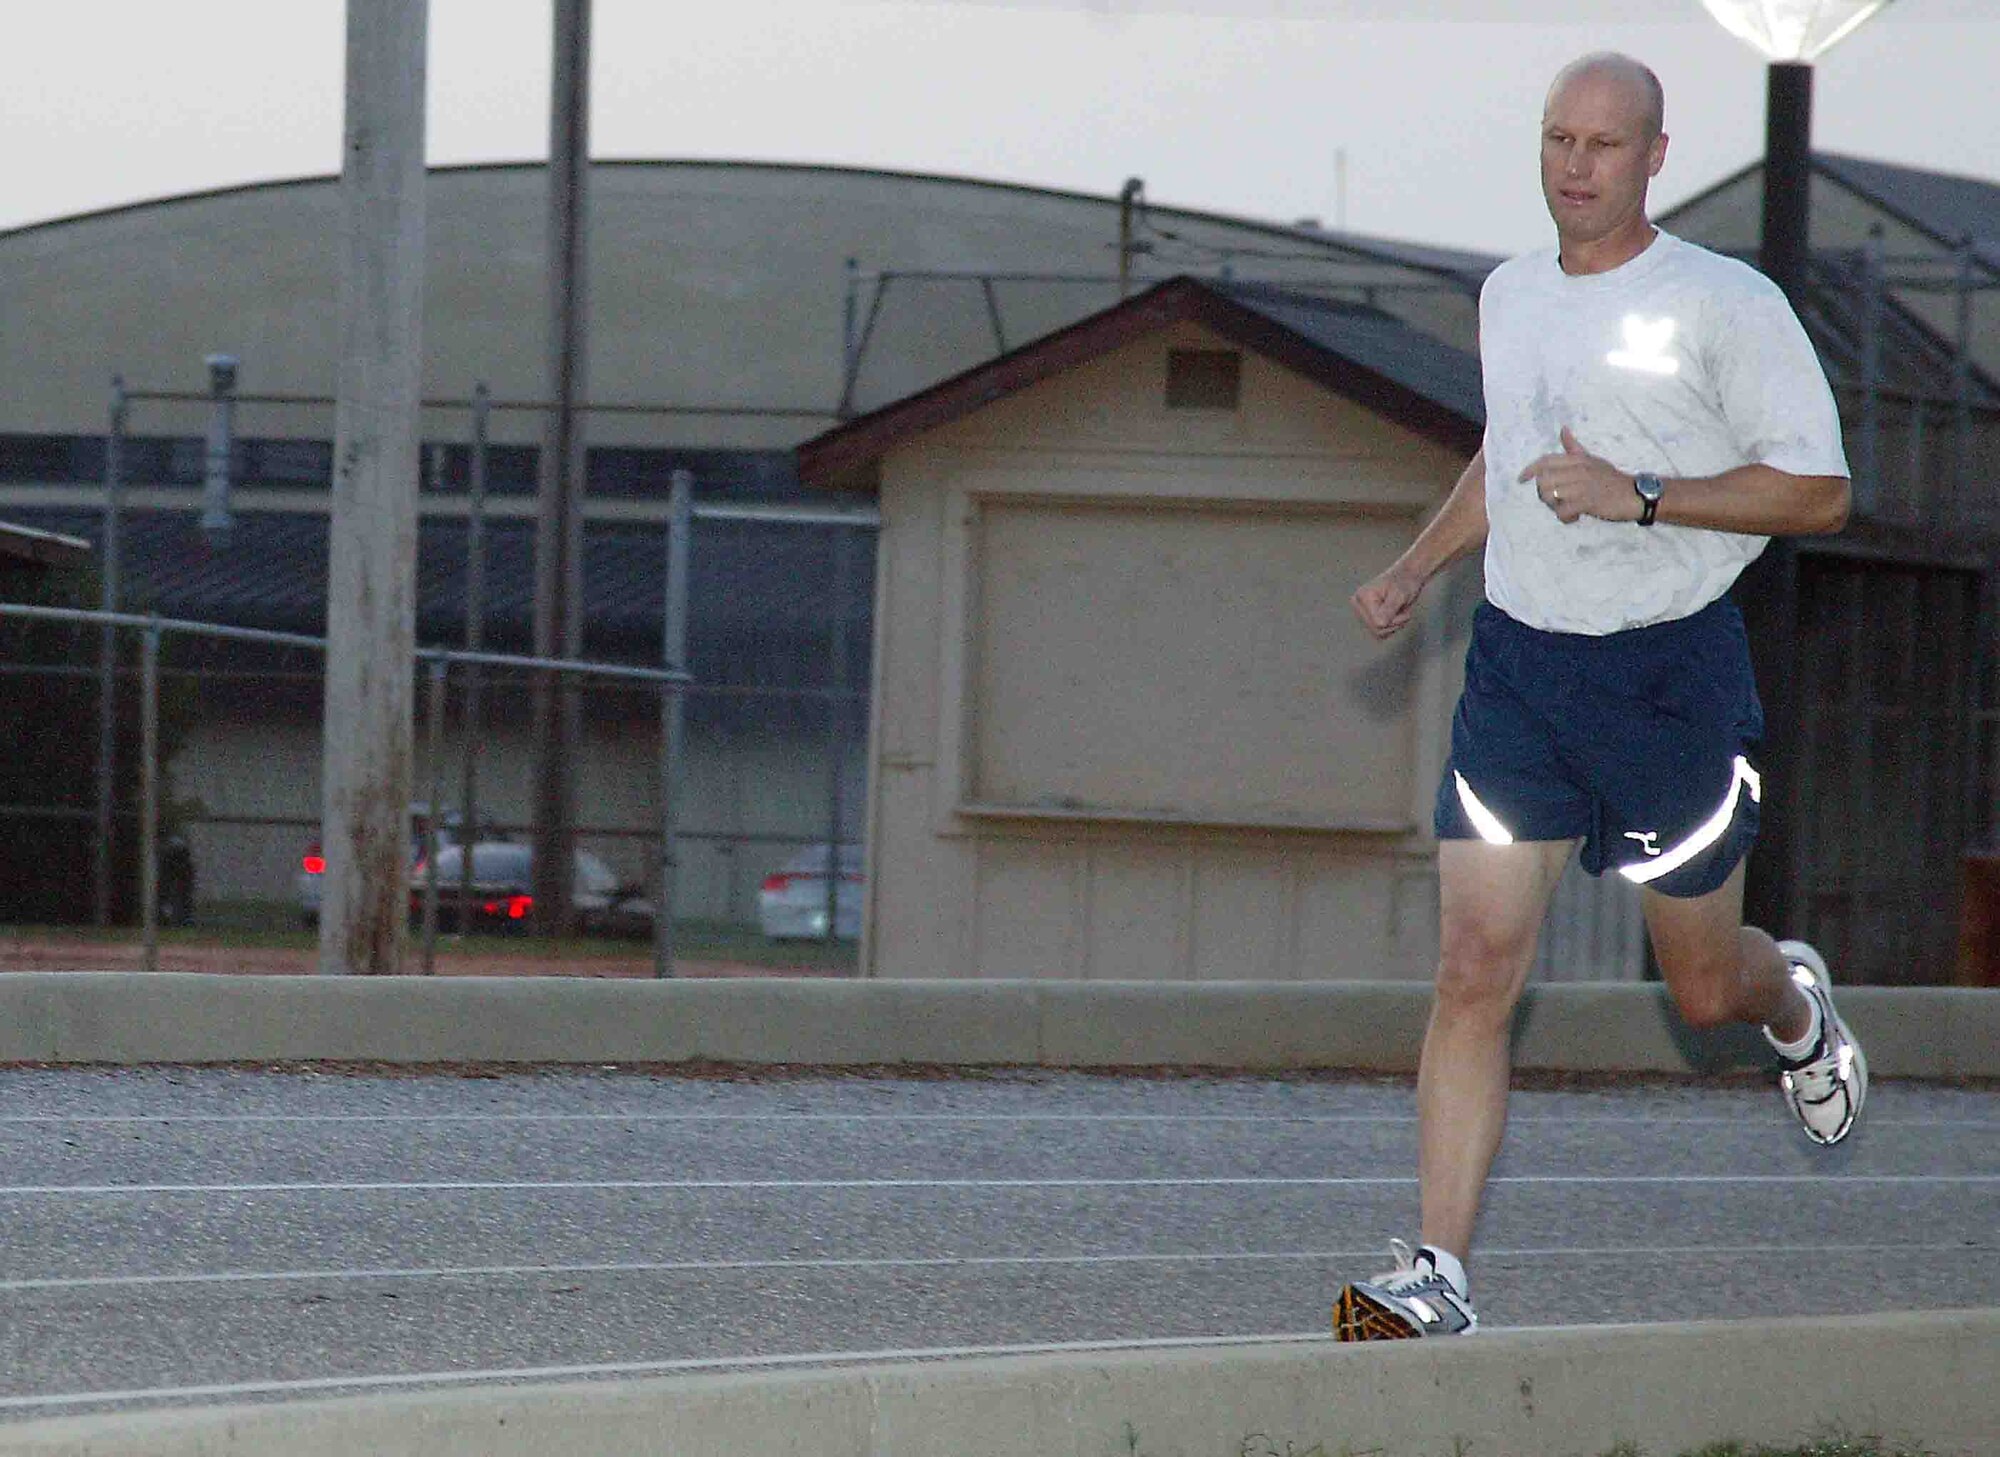 SHAW AIR FORCE BASE, S.C. -- Col. James Post, 20th Fighter Wing commander, performs the 1.5-mile run during his annual fitness evaluation Aug. 28 at the Shaw running track. The fitness test is now part of the enlisted and officer performance report. Colonel Post earned a perfect score on his fitness evaluation. (U.S. Air Force photo/Senior Airman John Gordinier)